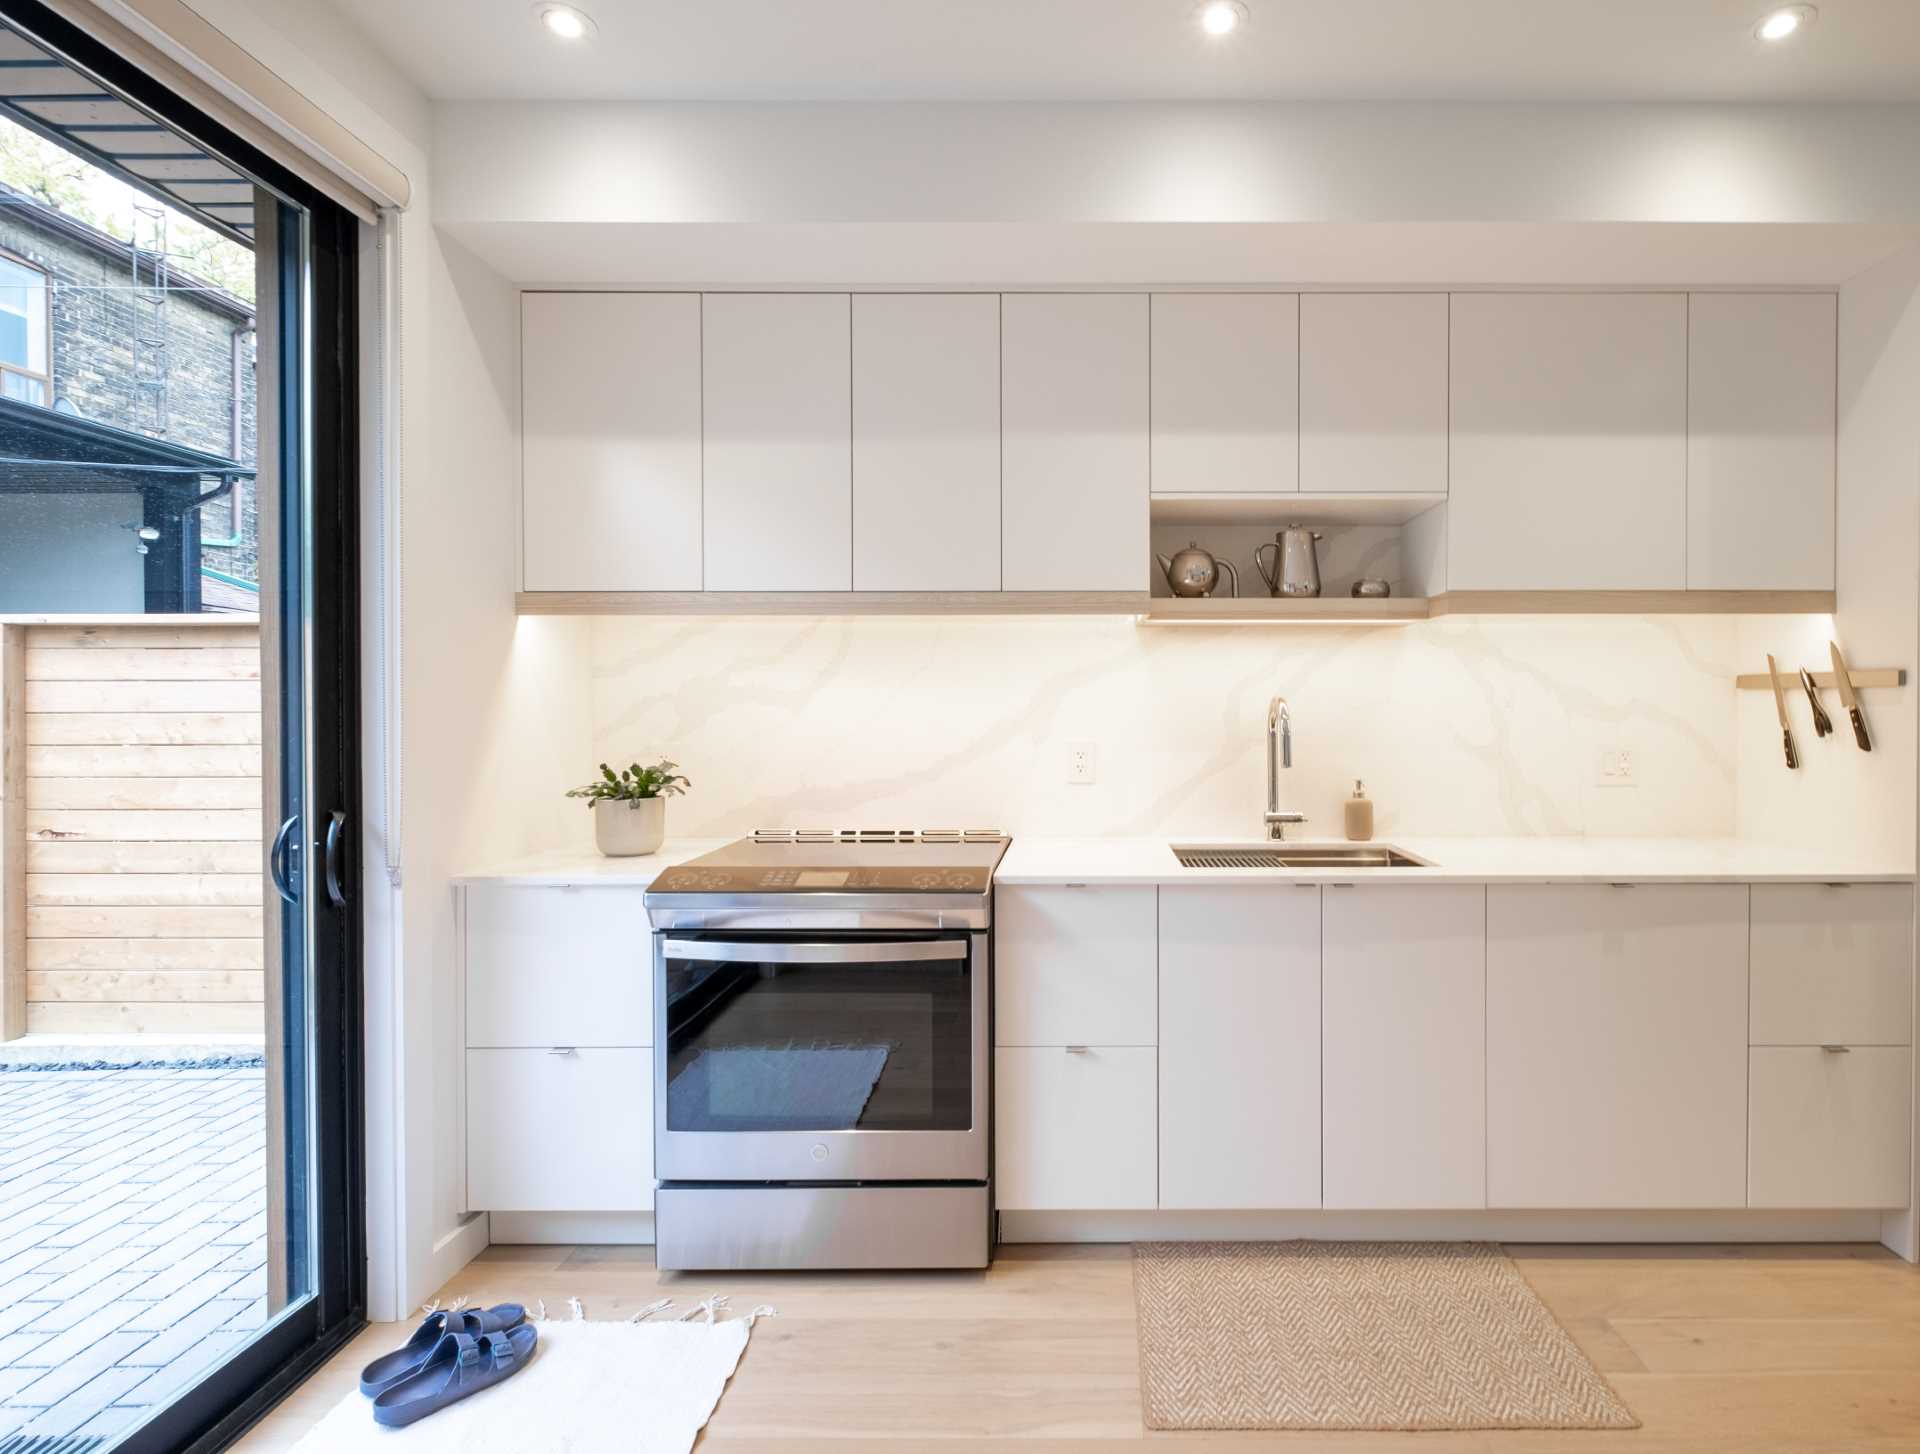 A small laneway house with a modern kitchen that includes lighting beneath the cabinets.